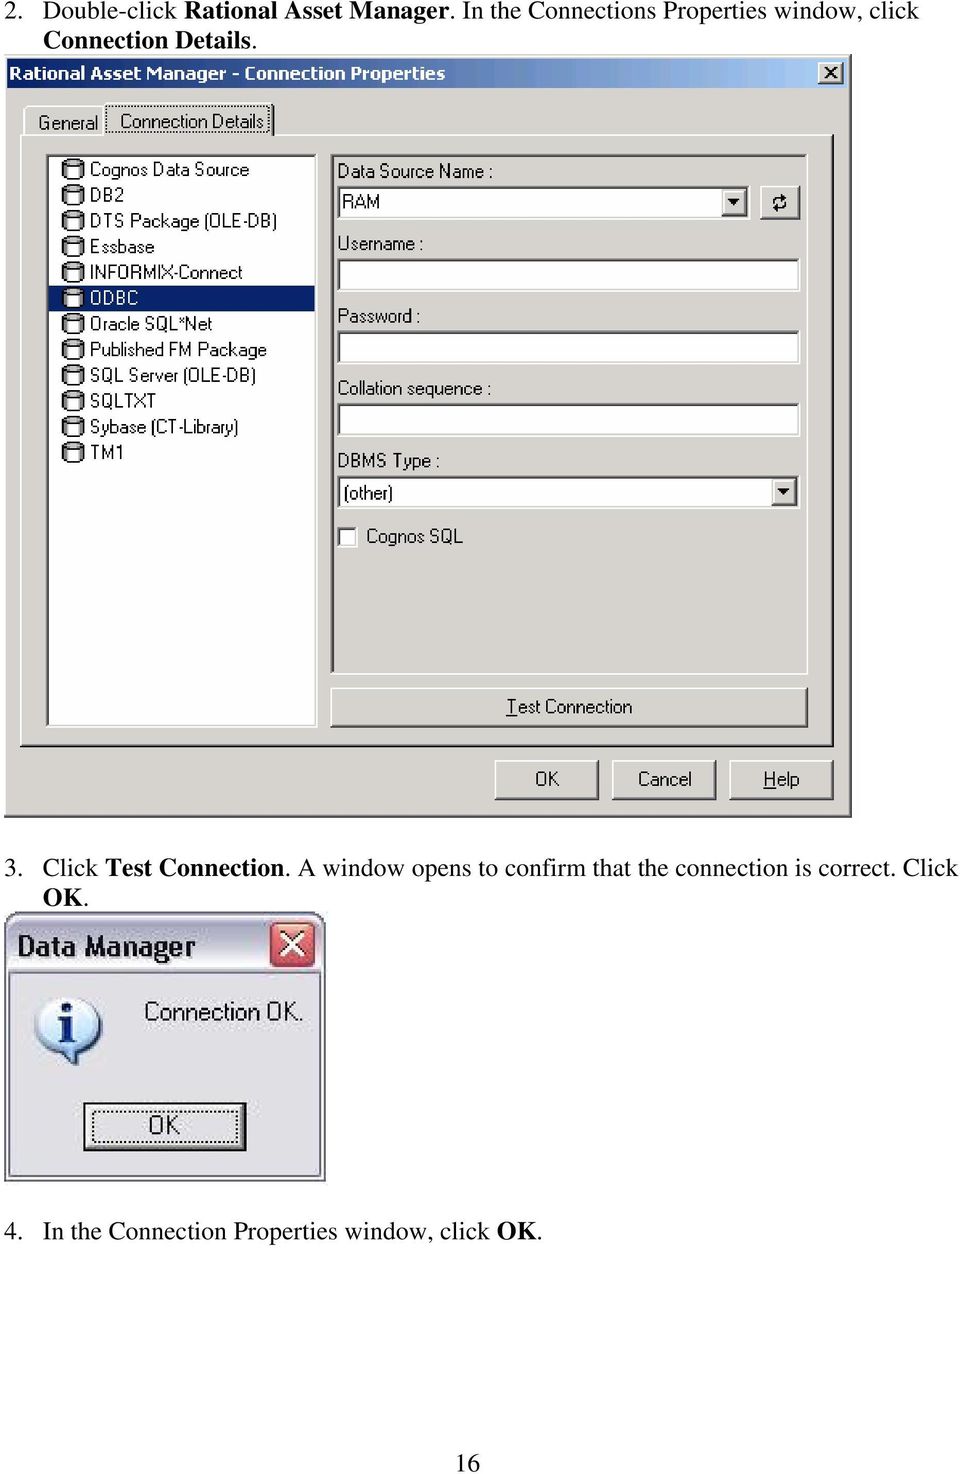 3. Click Test Connection.